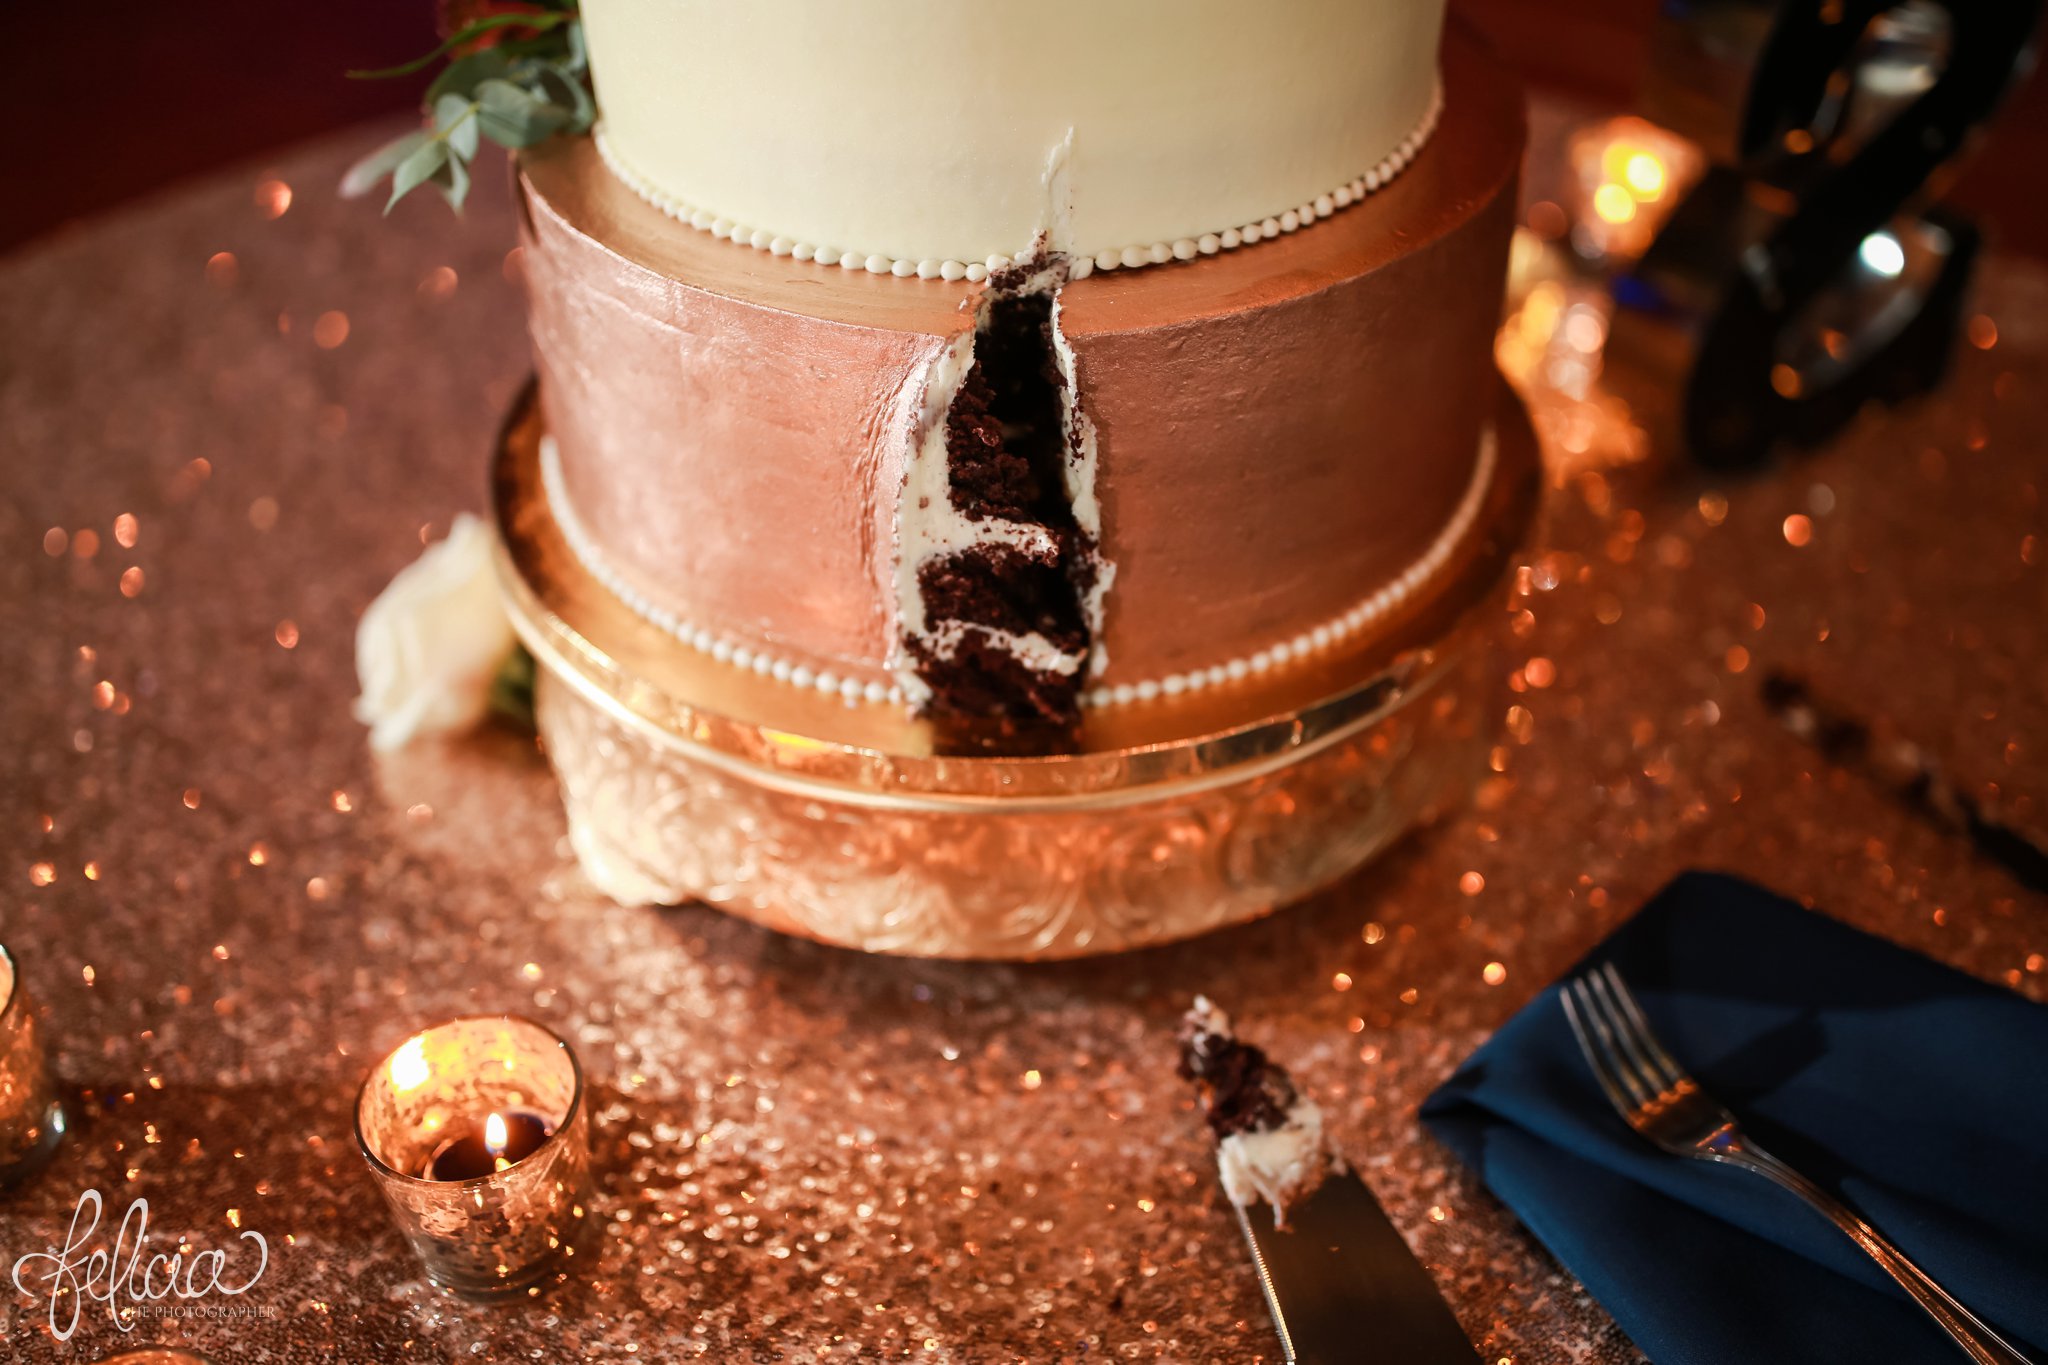 images by feliciathephotographer.com | wedding photographer | downtown kansas city | candle | cutting the cake | details | reception | rose gold | sequins | mclain's bakery | navy | 